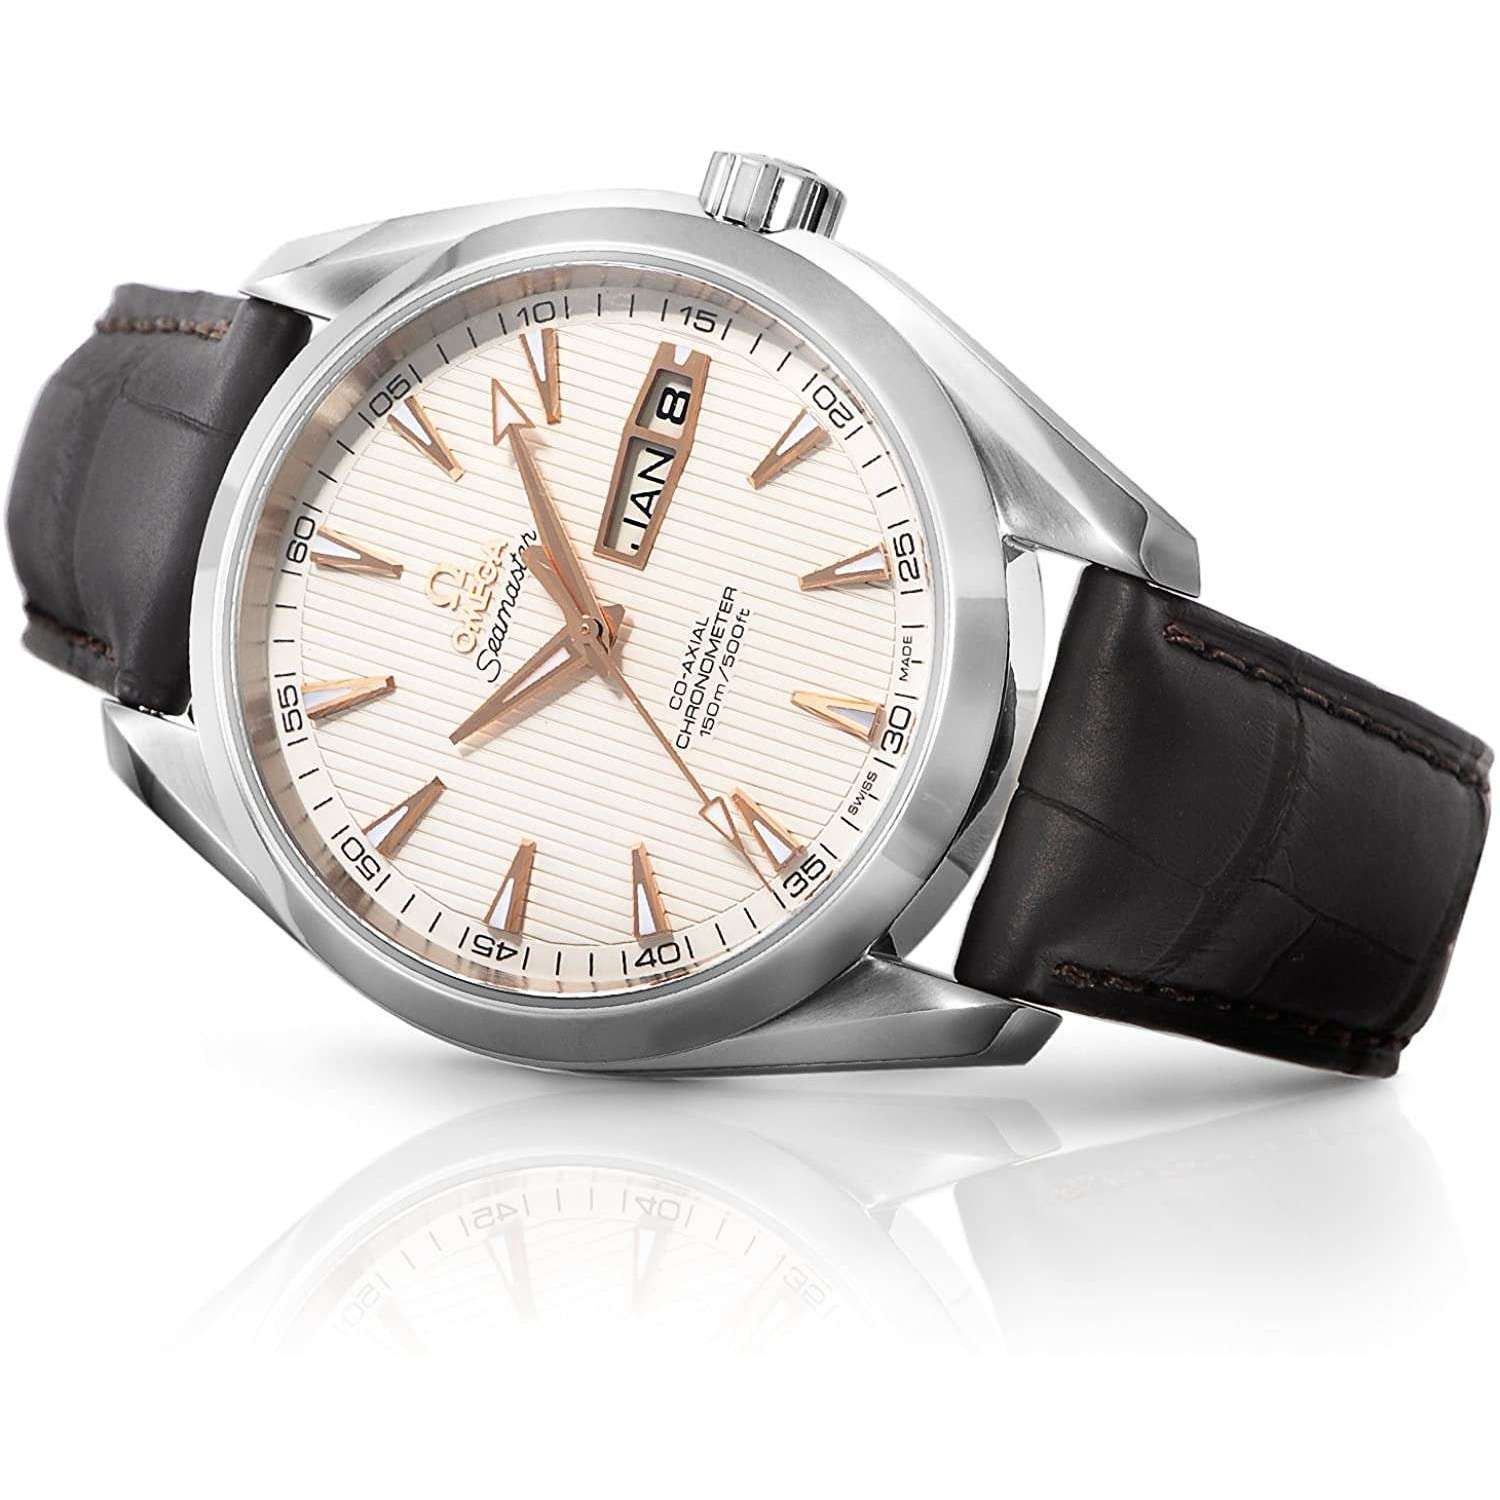 ROOK JAPAN:OMEGA SEAMASTER CO-AXIAL CHRONOMETER 43 MM MEN WATCH 231.13.43.22.02.002,Luxury Watch,Omega